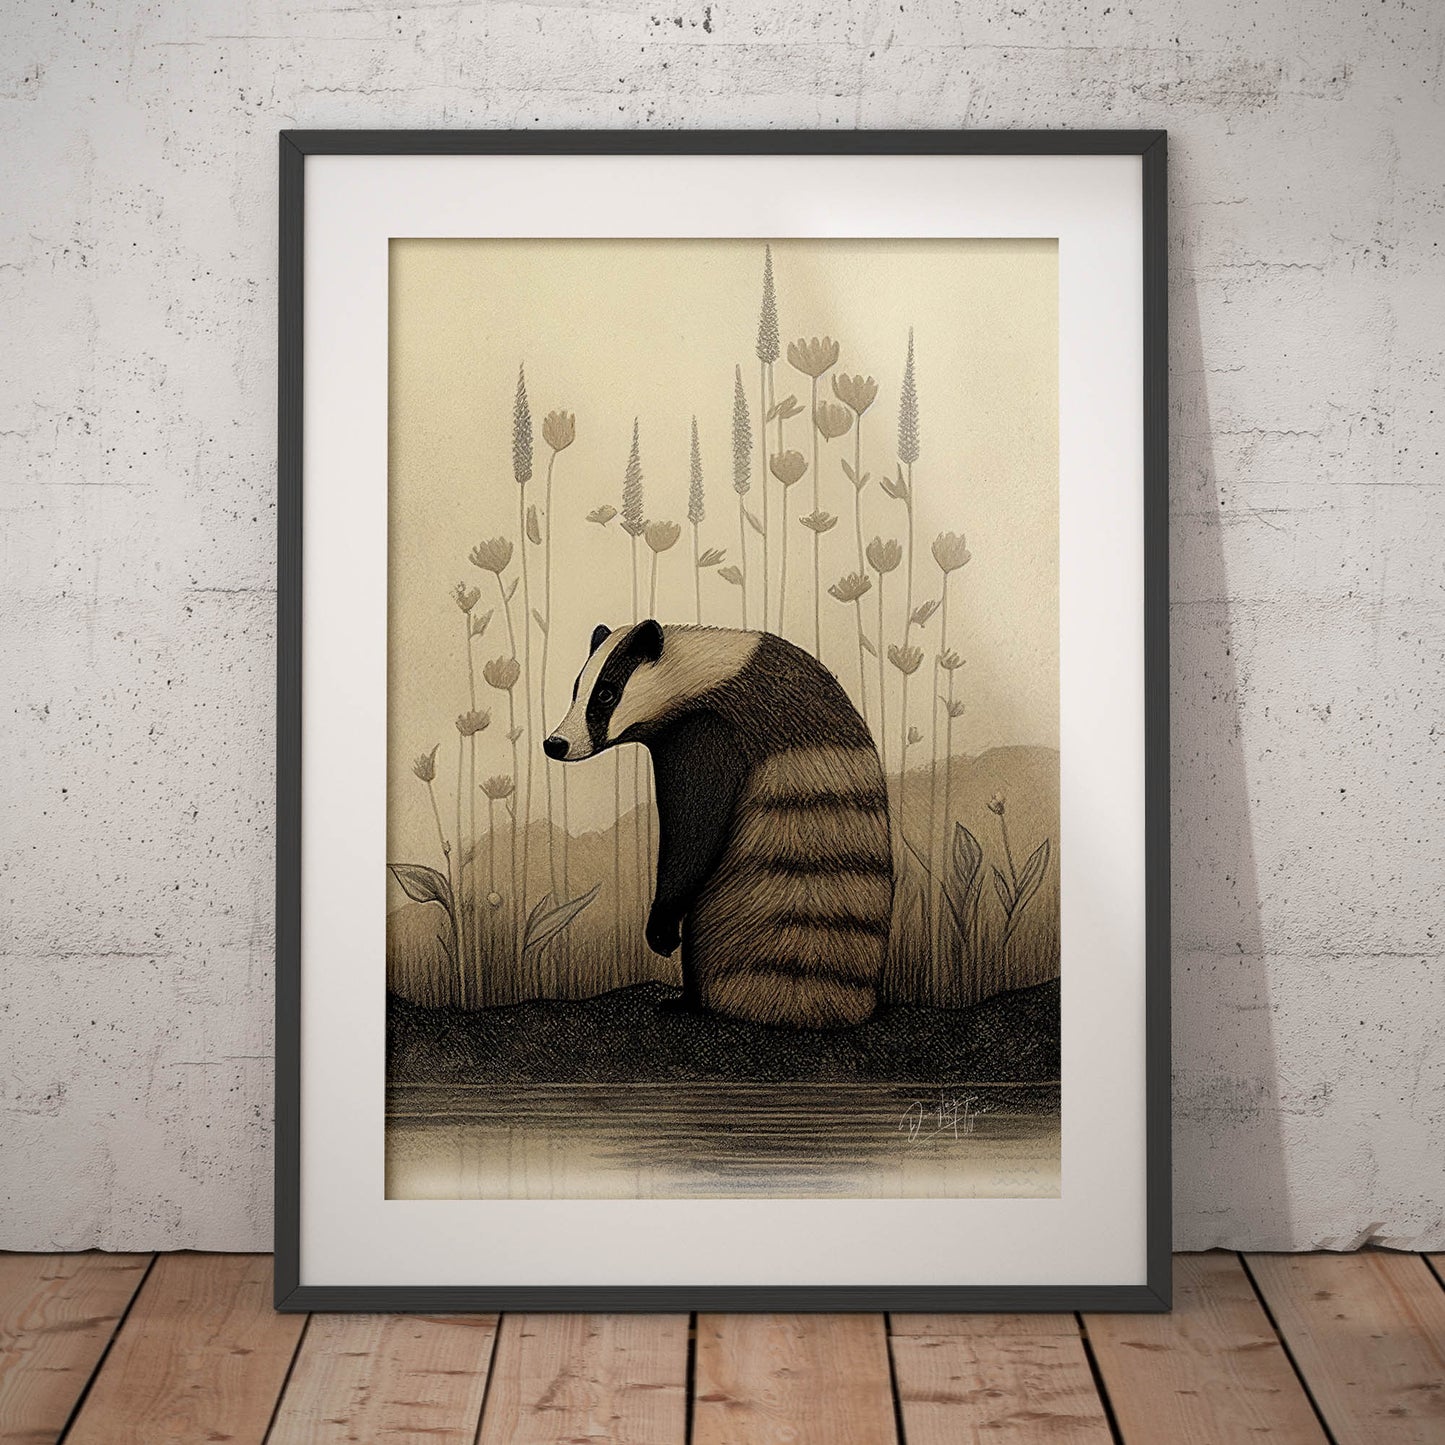 »Badger Nuzzle And Brood« retro poster